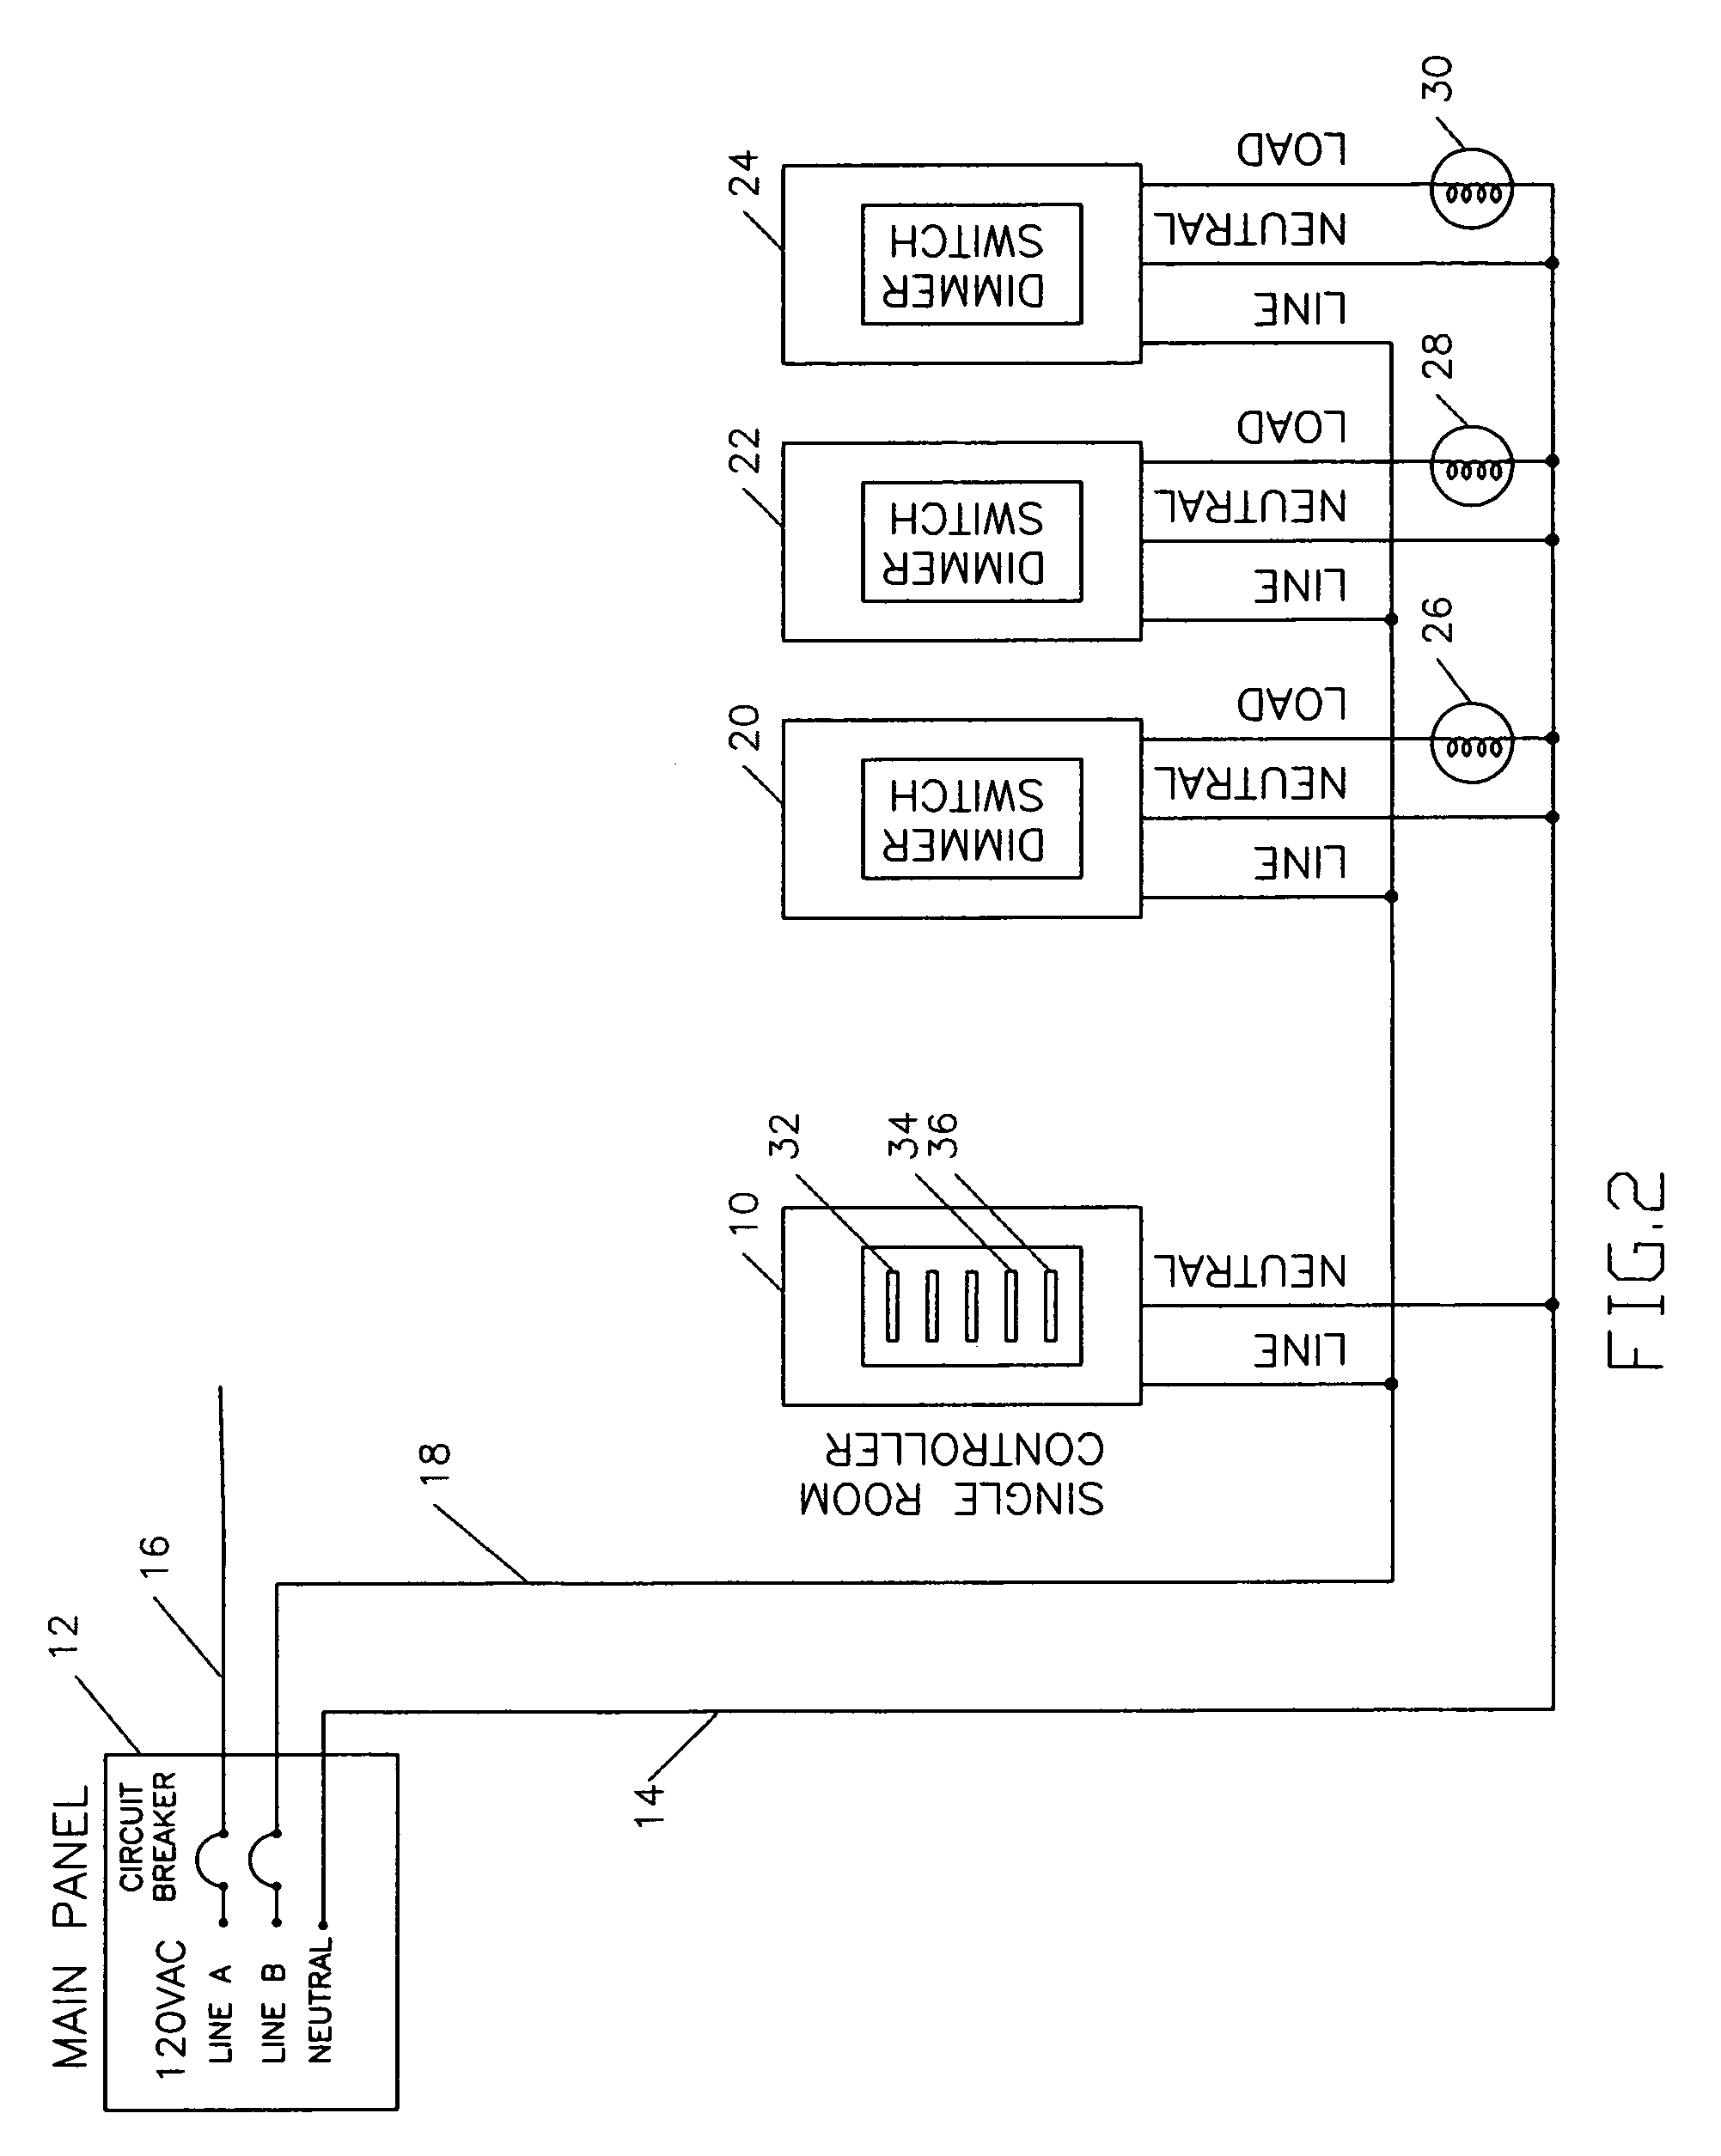 Powerline pulse position modulated transmitter apparatus and method